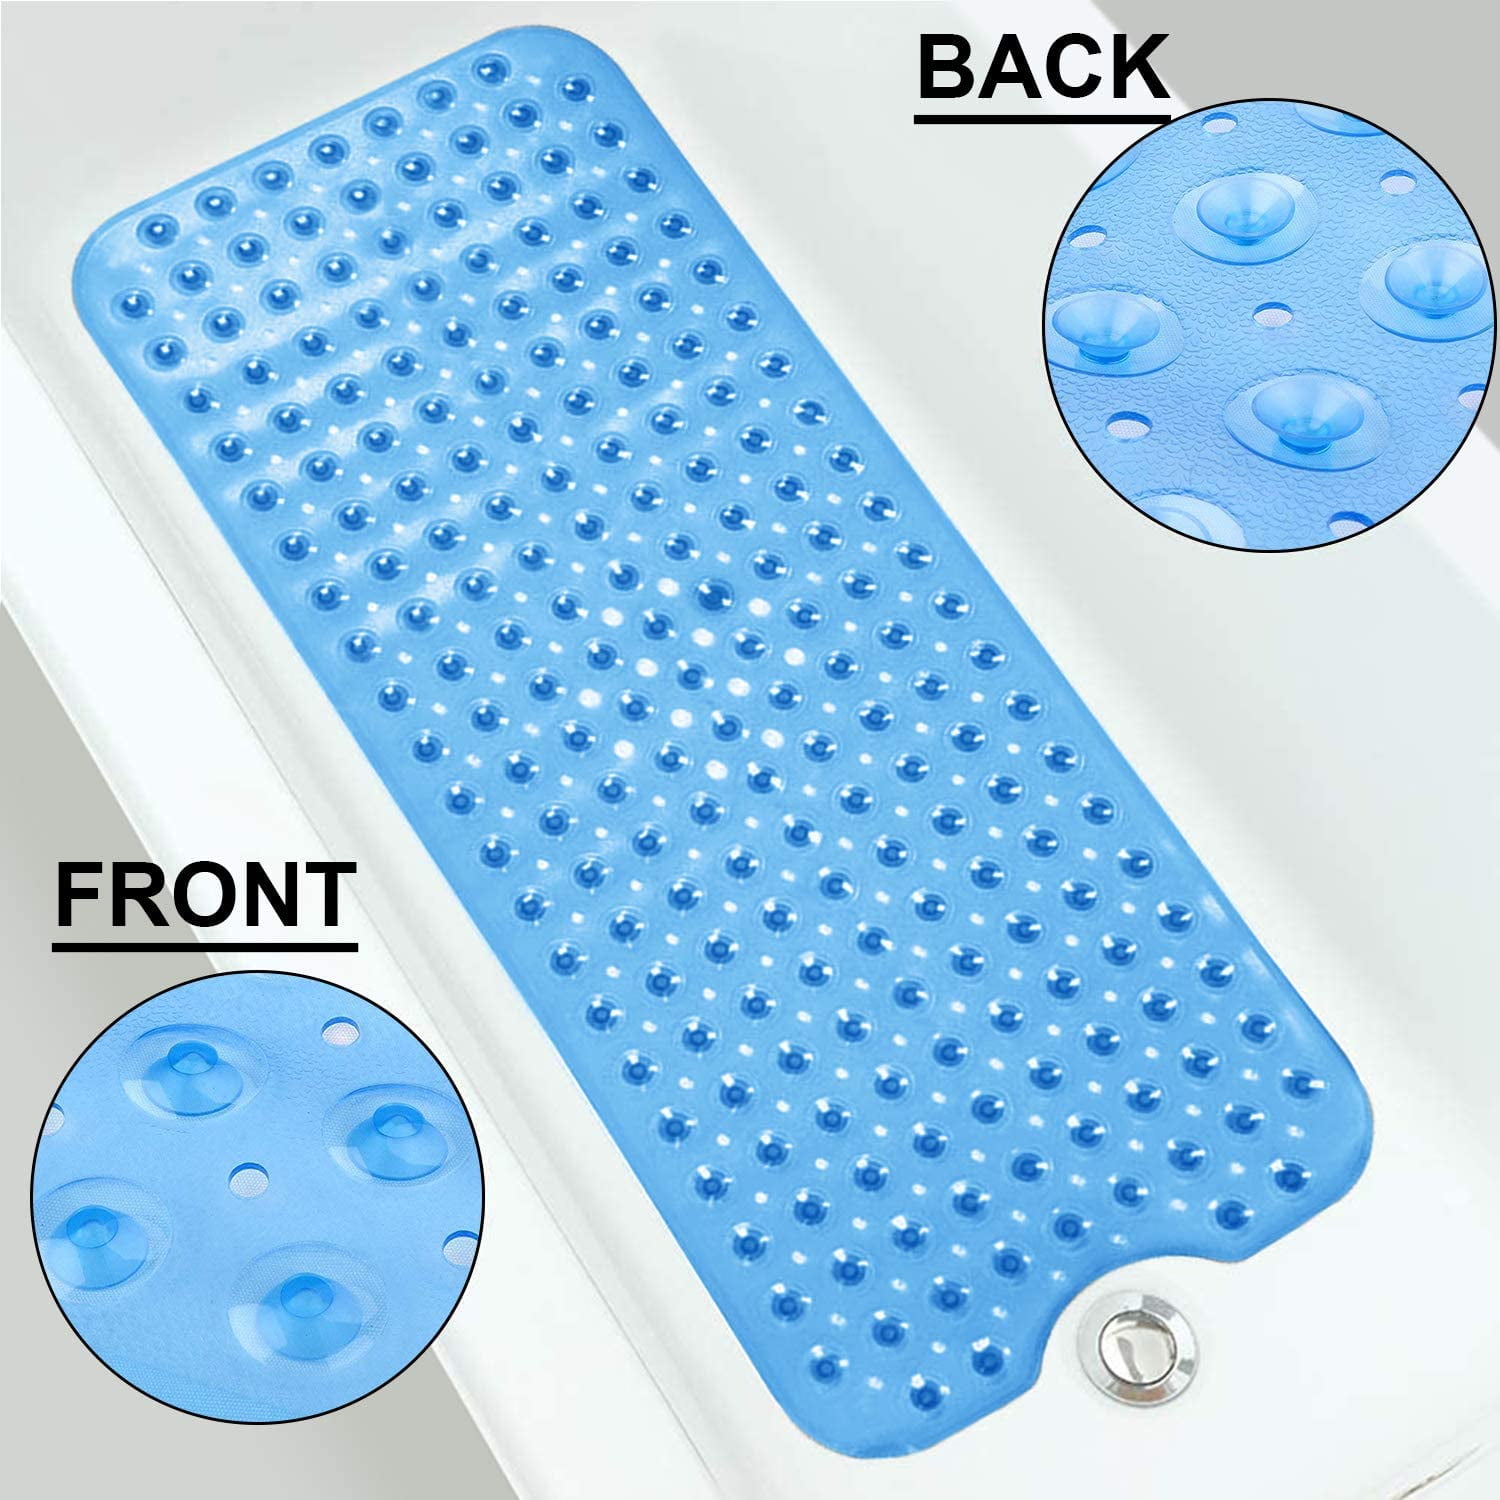 Machine Washable XIYUNTE Extra Long Bath Mats Black Shower Mats Mildew Resistant Non-slip Pebbled Bathtub Mats with Suction Cup for Bathroom Clear 100 x 40cm